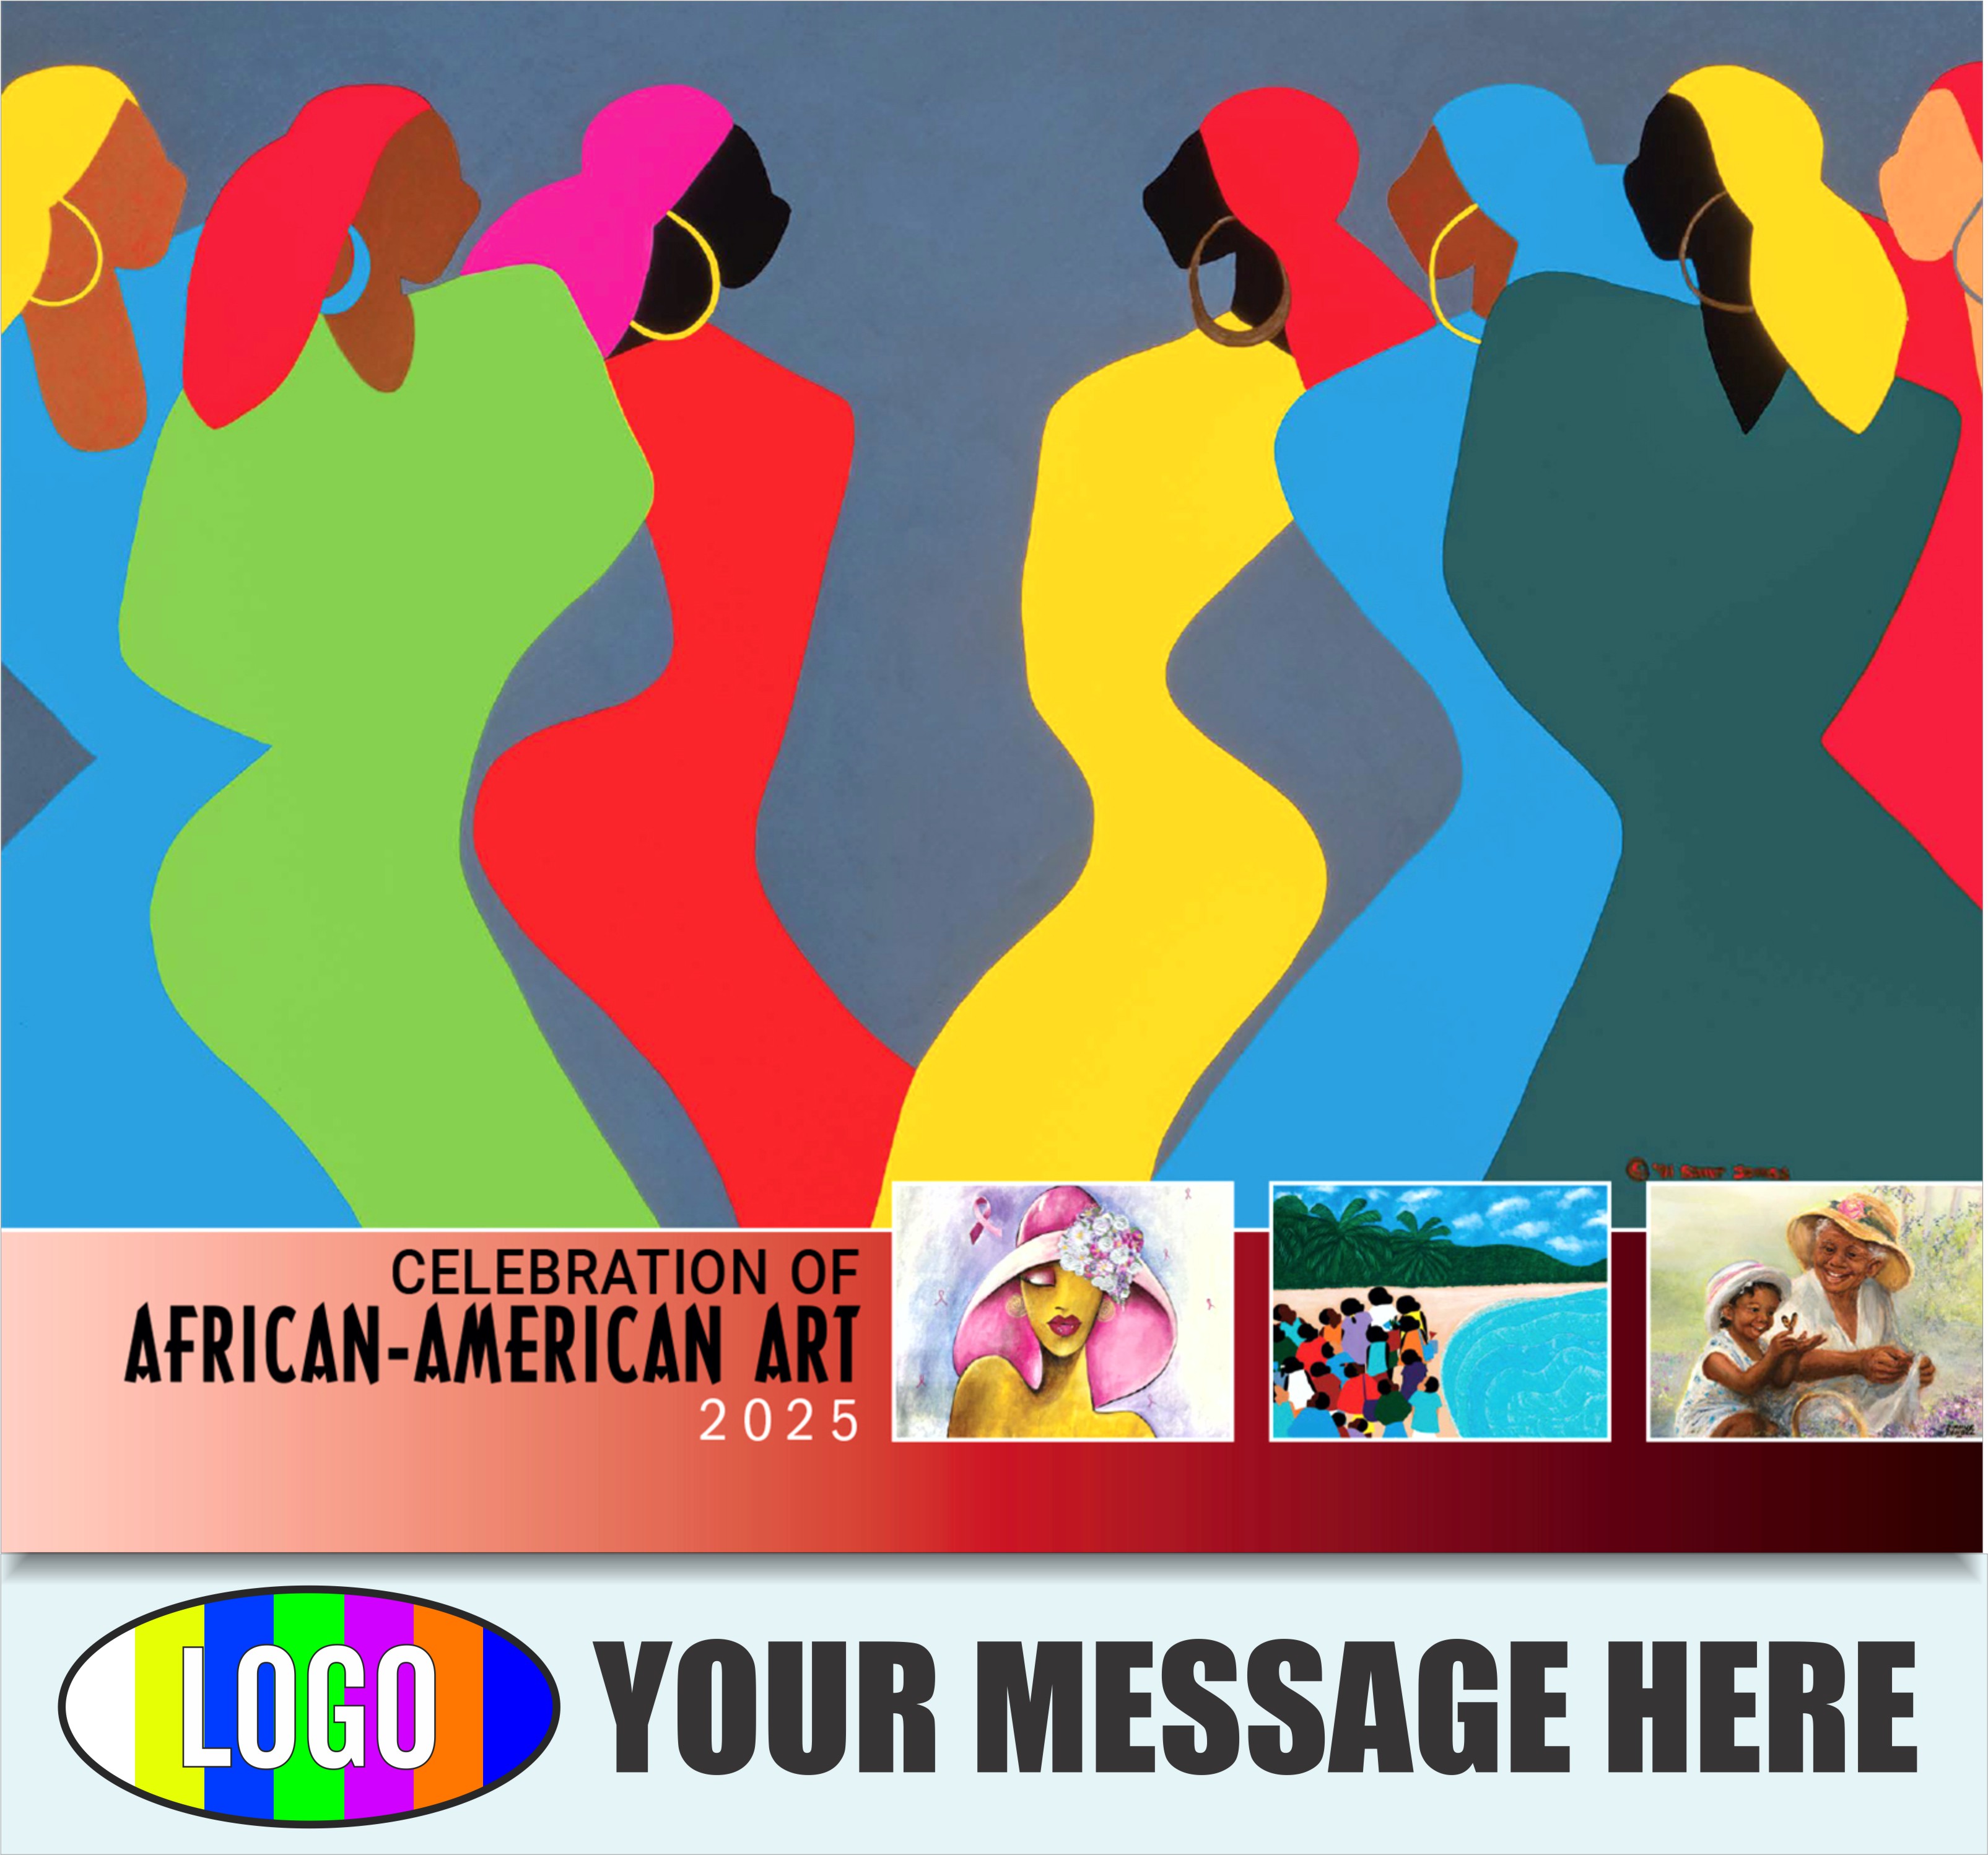 Celebration of African American Art 2025 Business Promotional Calendar - cover